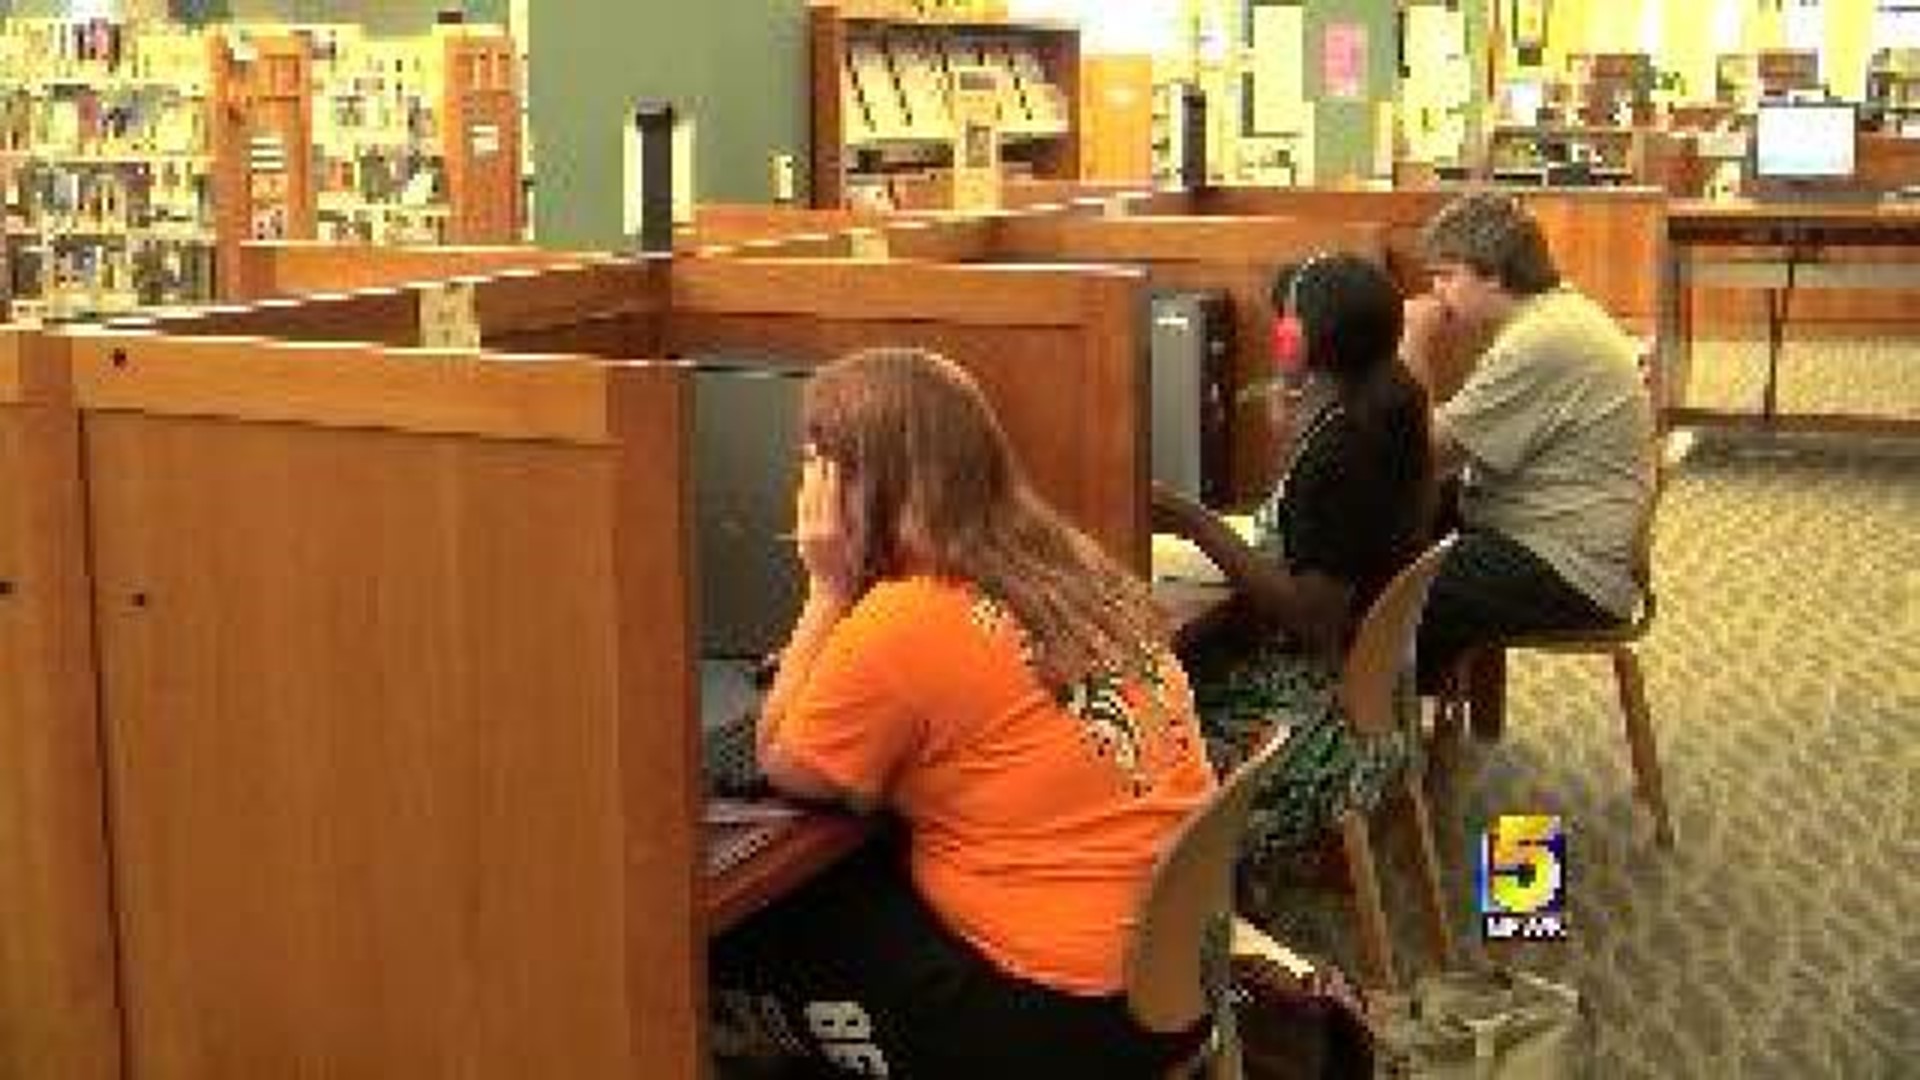 E-Cigarettes, Smokeless Tobacco Banned From Public Library